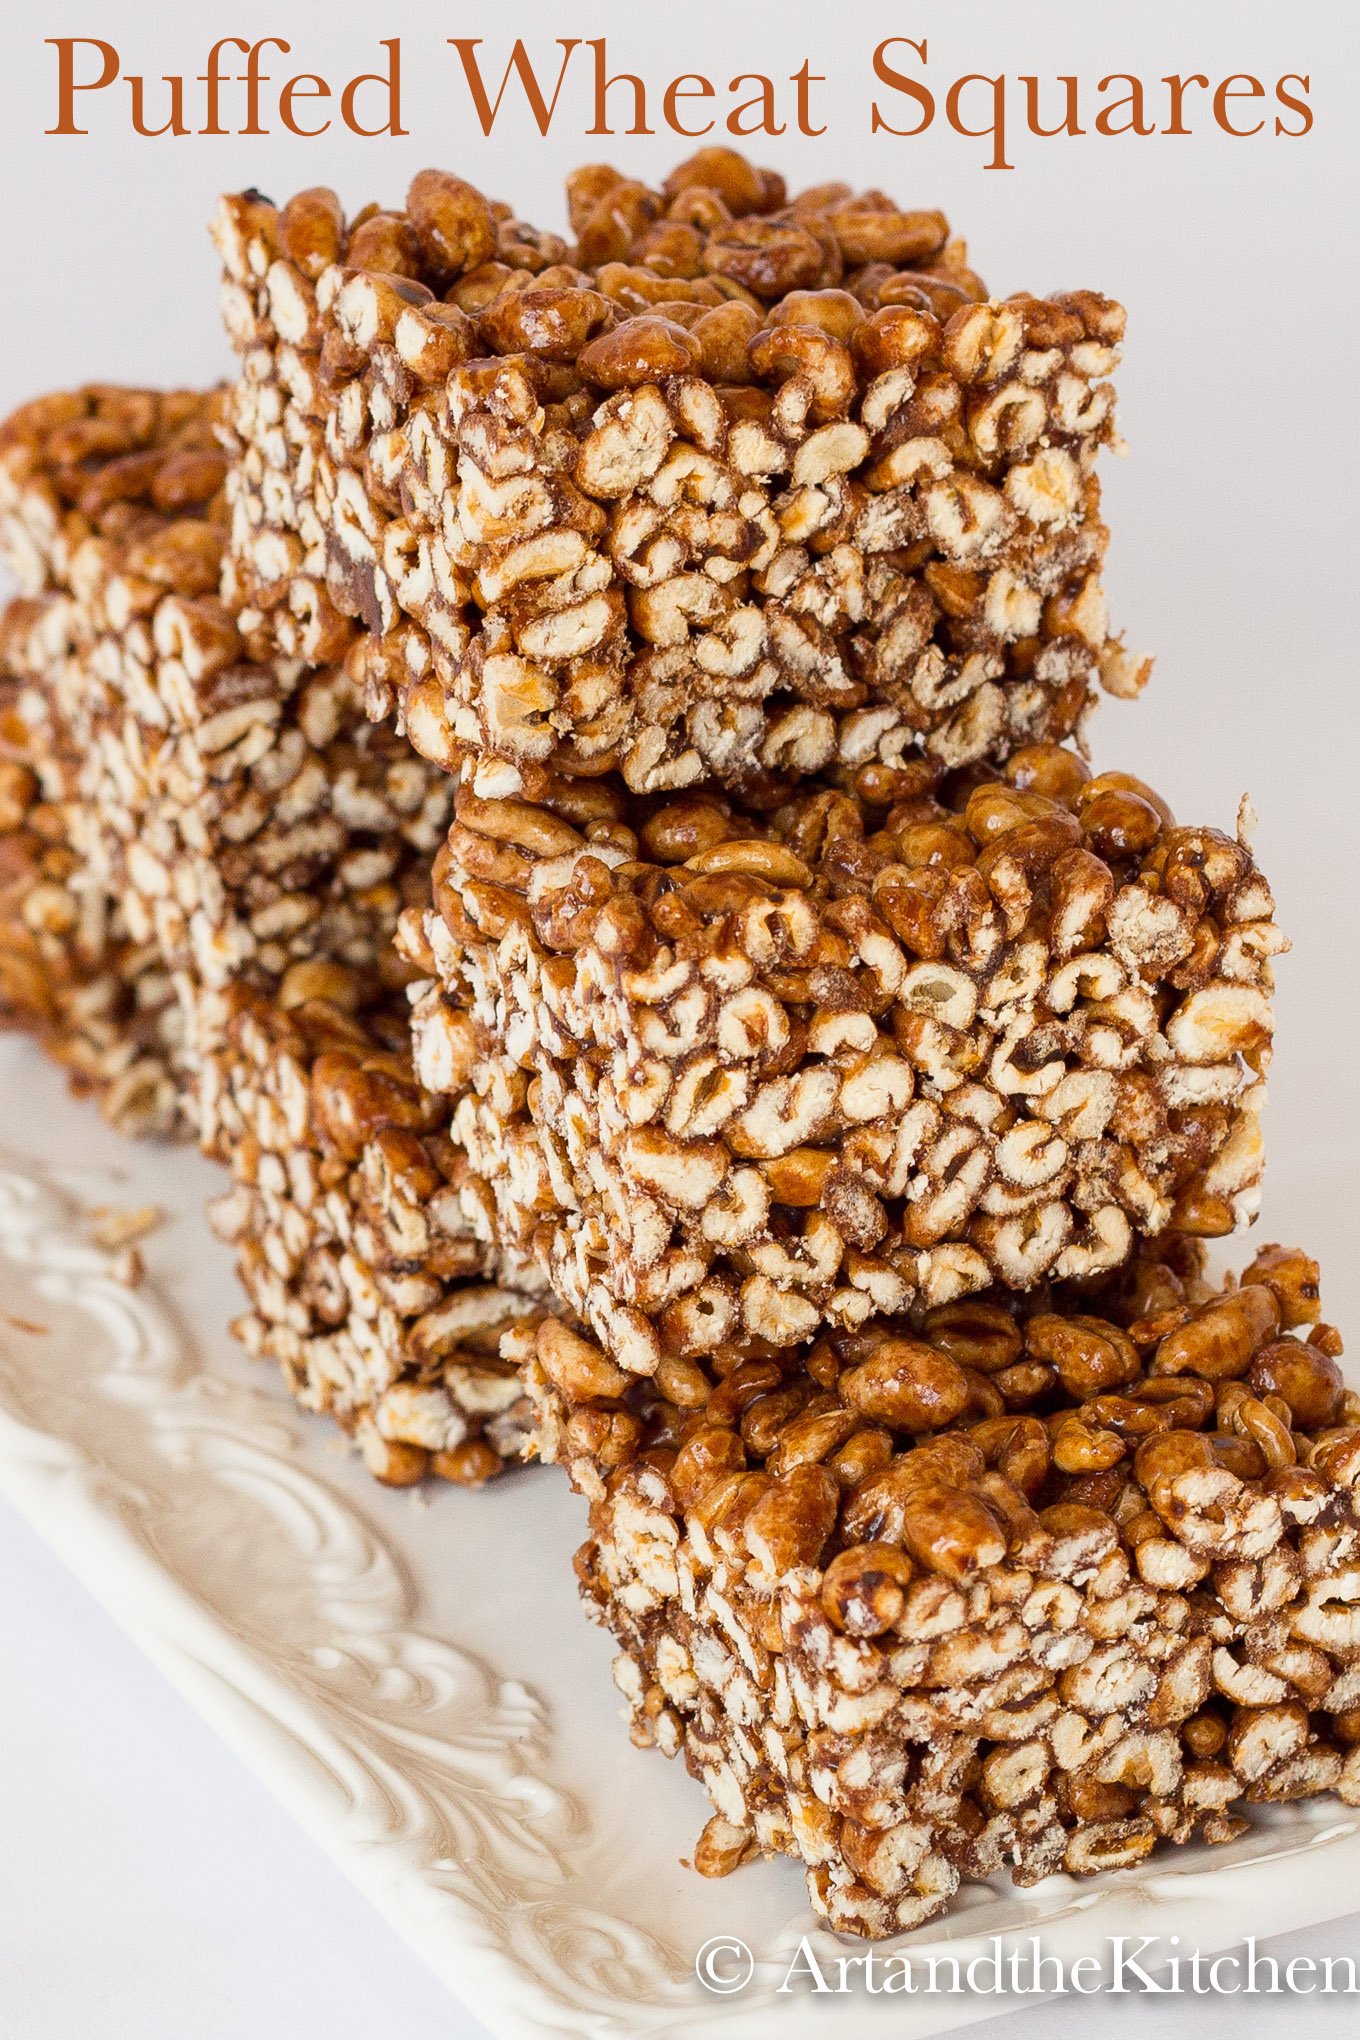 Stack of squares made of puffed wheat on white plate.